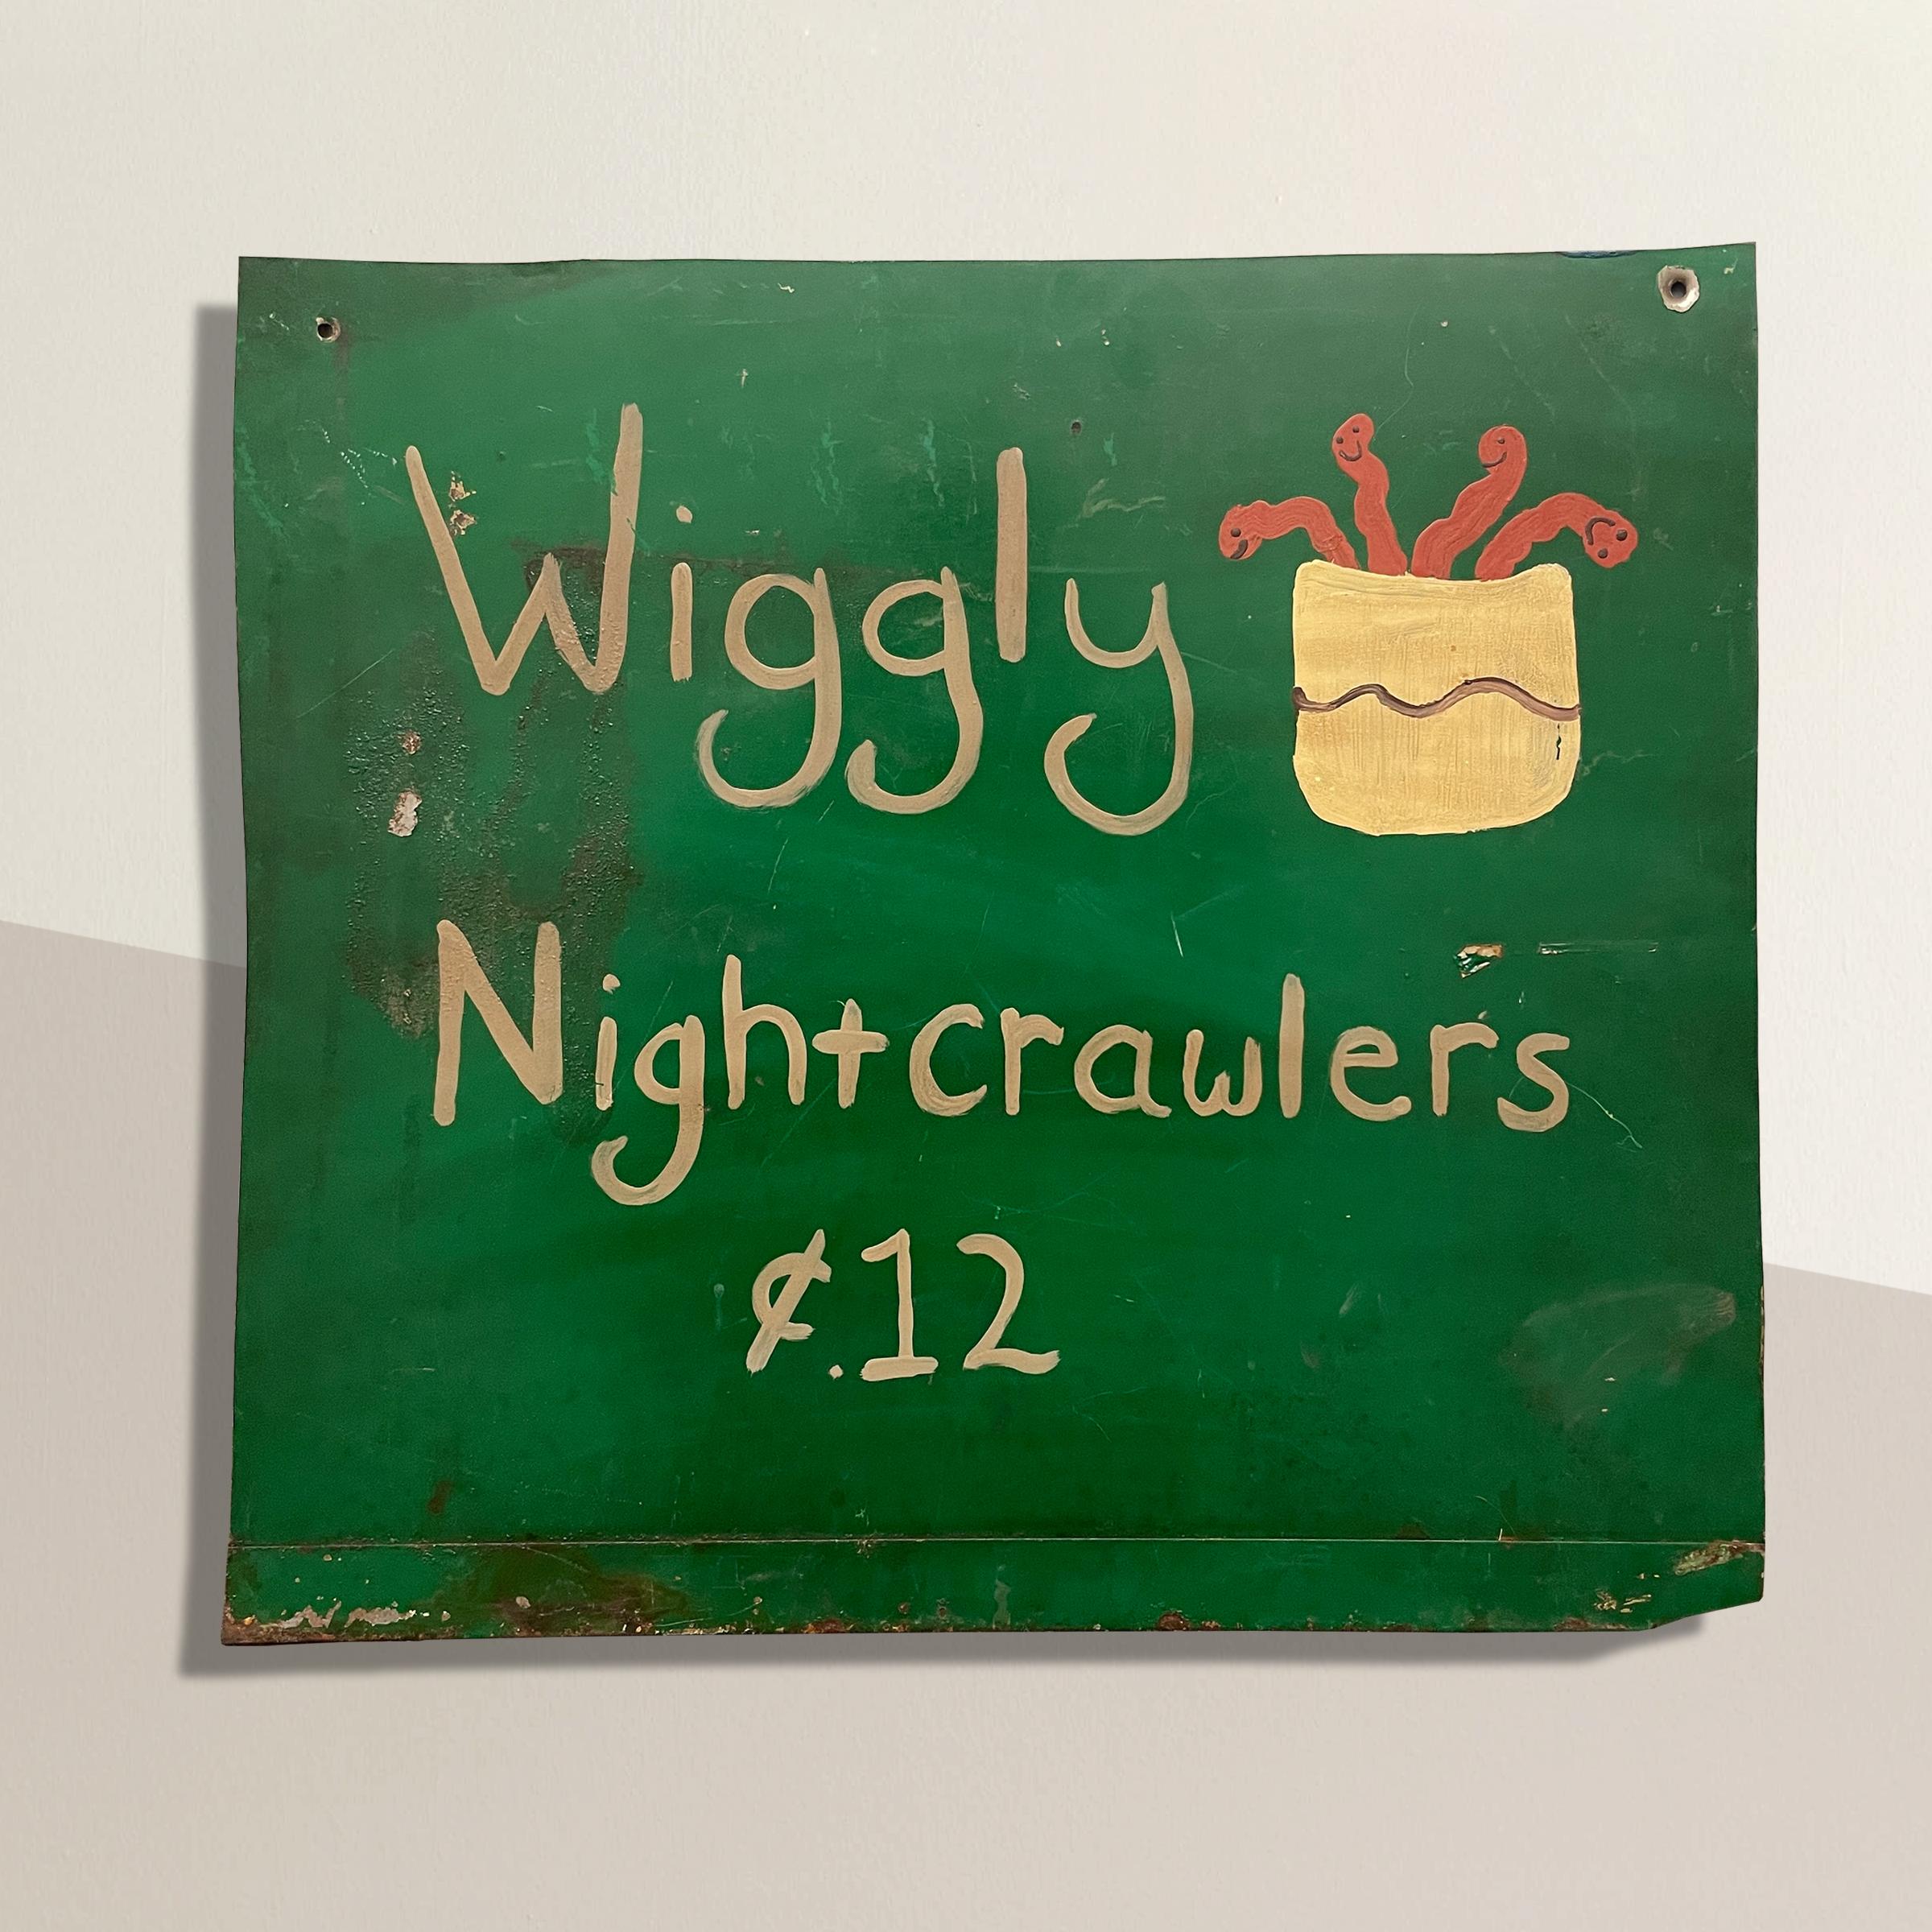 A whimsical and playful 20th century American Folk Art bait shop sign reading, 'Wiggly Nightcrawerls ¢.12' and with a jar of smiling worms crawling out of the jar. Sign comes with a custom steel wall mount that holds the sign out from the wall.